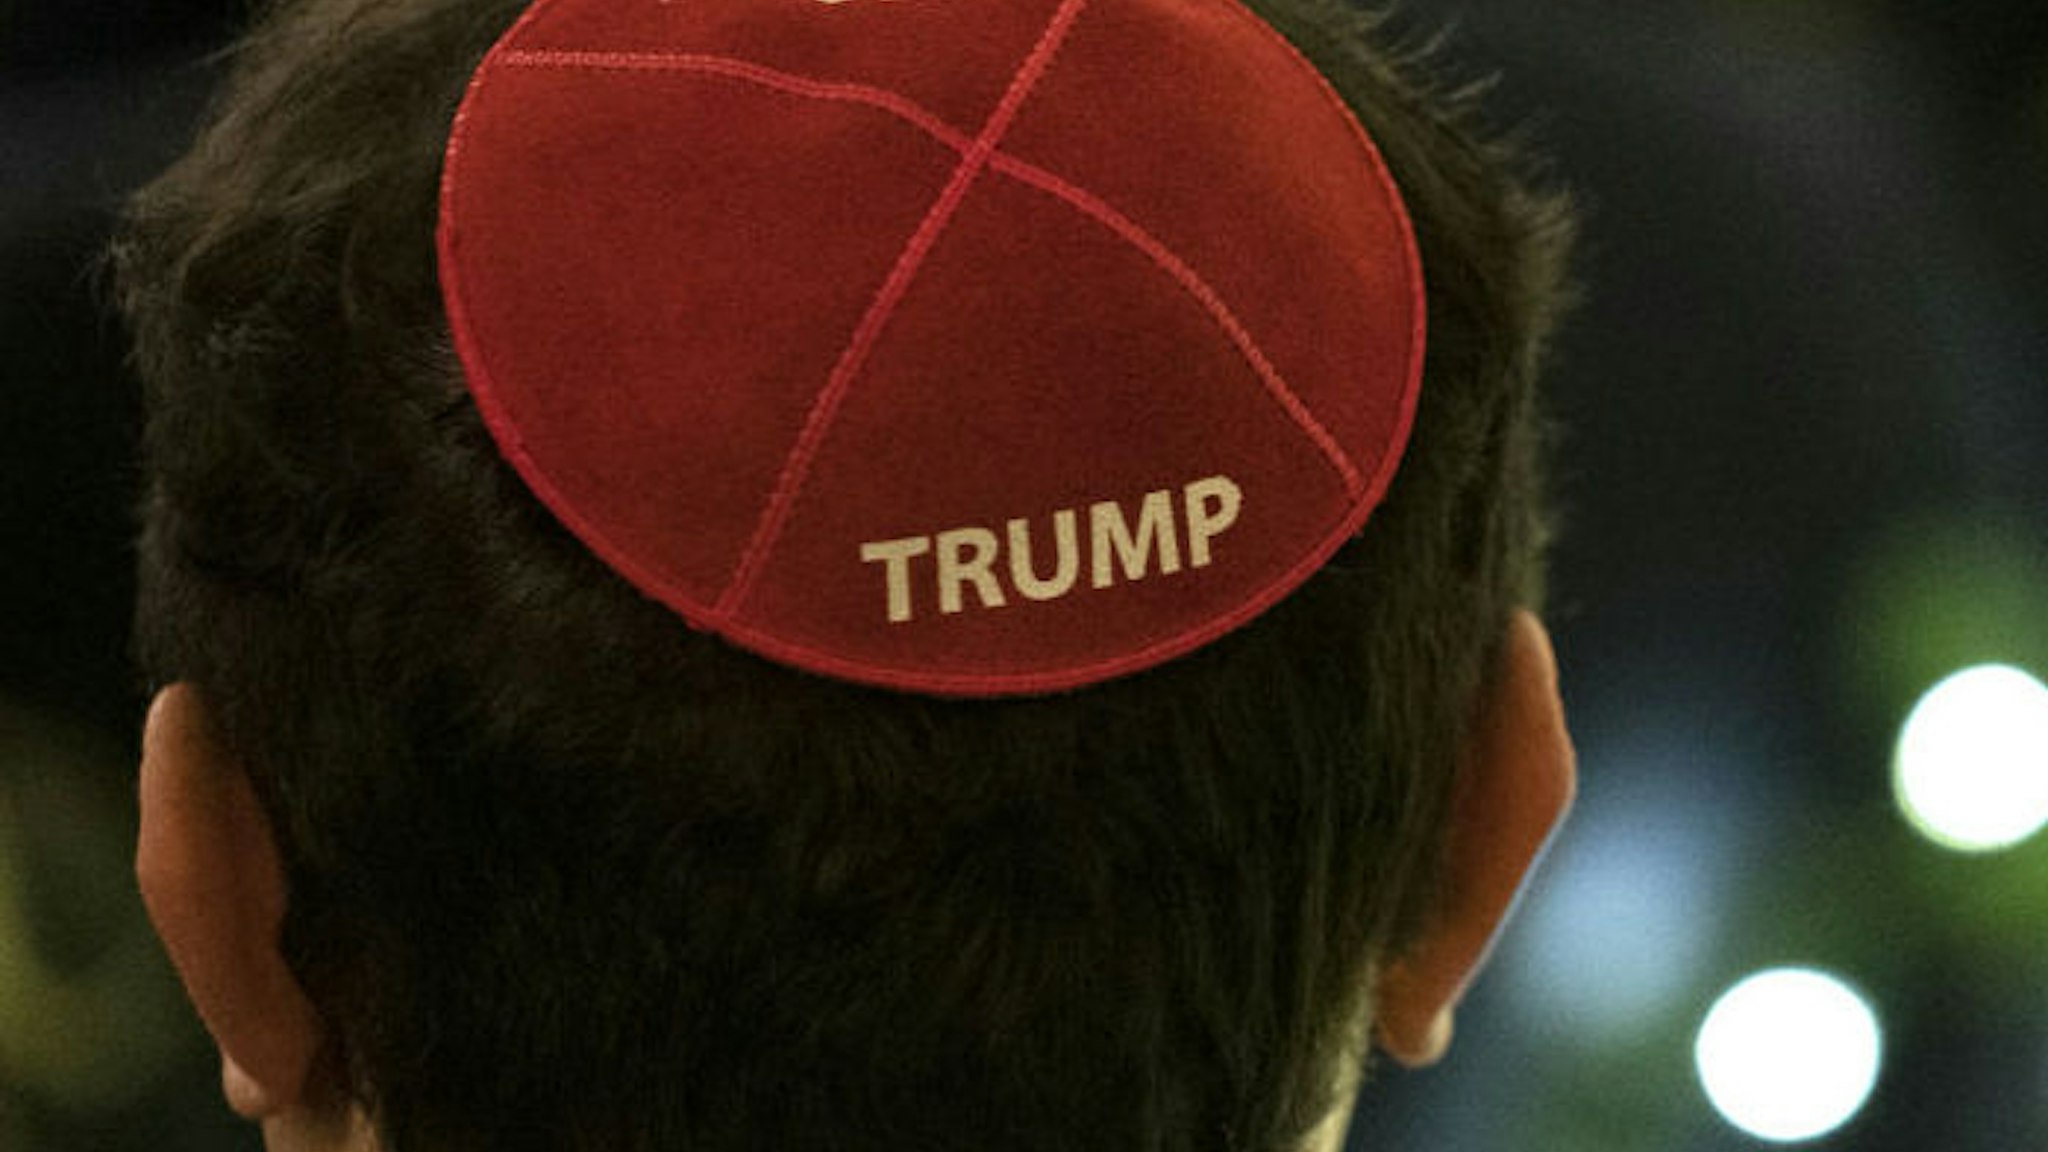 An attendee wears a Trump yarmulke as U.S. President Donald Trump speaks during a Hanukkah reception at the White House in Washington, D.C., U.S., on Wednesday, Dec. 11, 2019. During the event Trump signed an executive order stating that colleges and universities that allow groups with anti-Semitic beliefs to operate on their campuses will not receive federal educational funding.